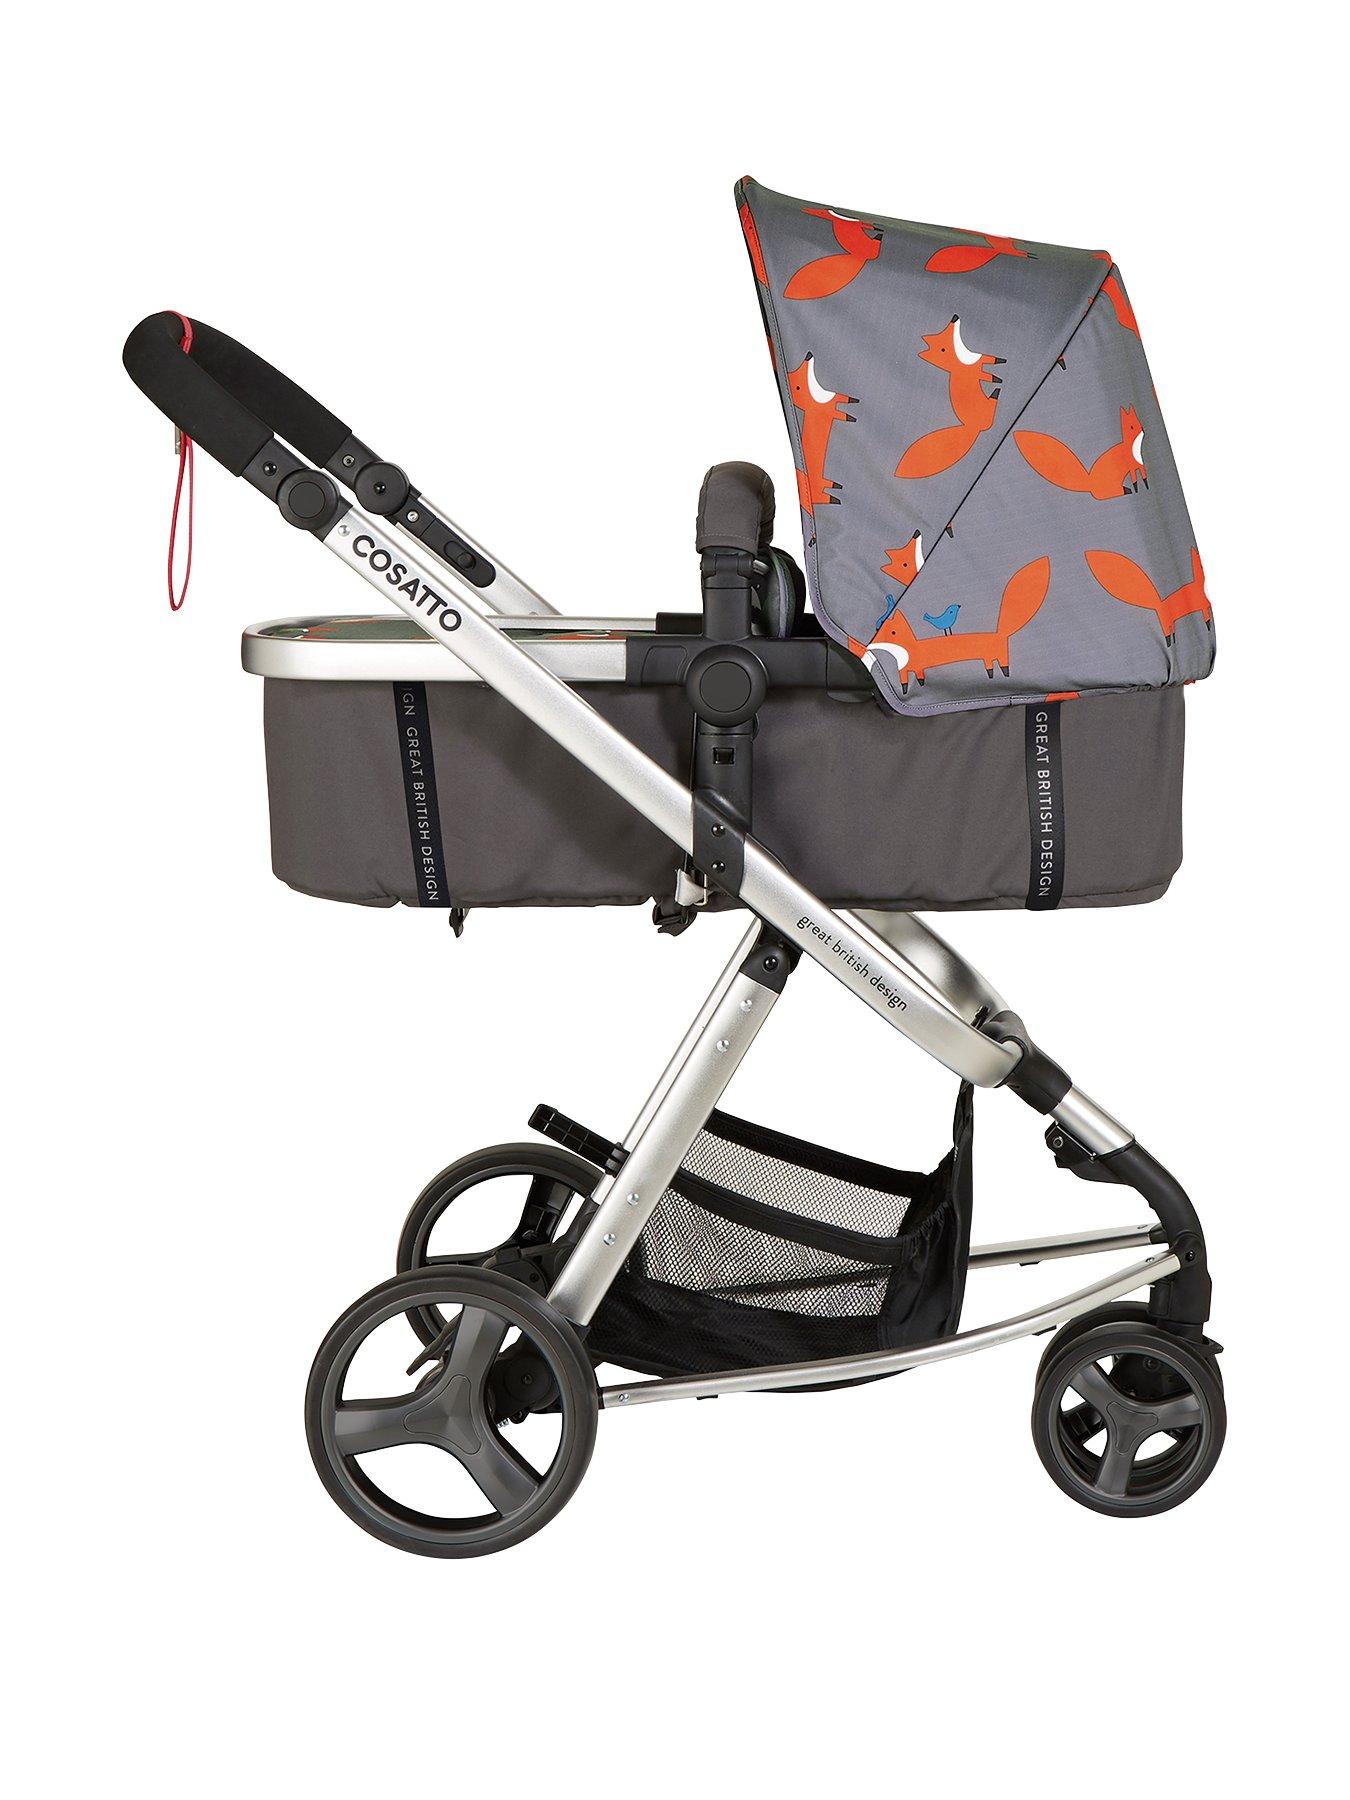 cosatto giggle pushchair age